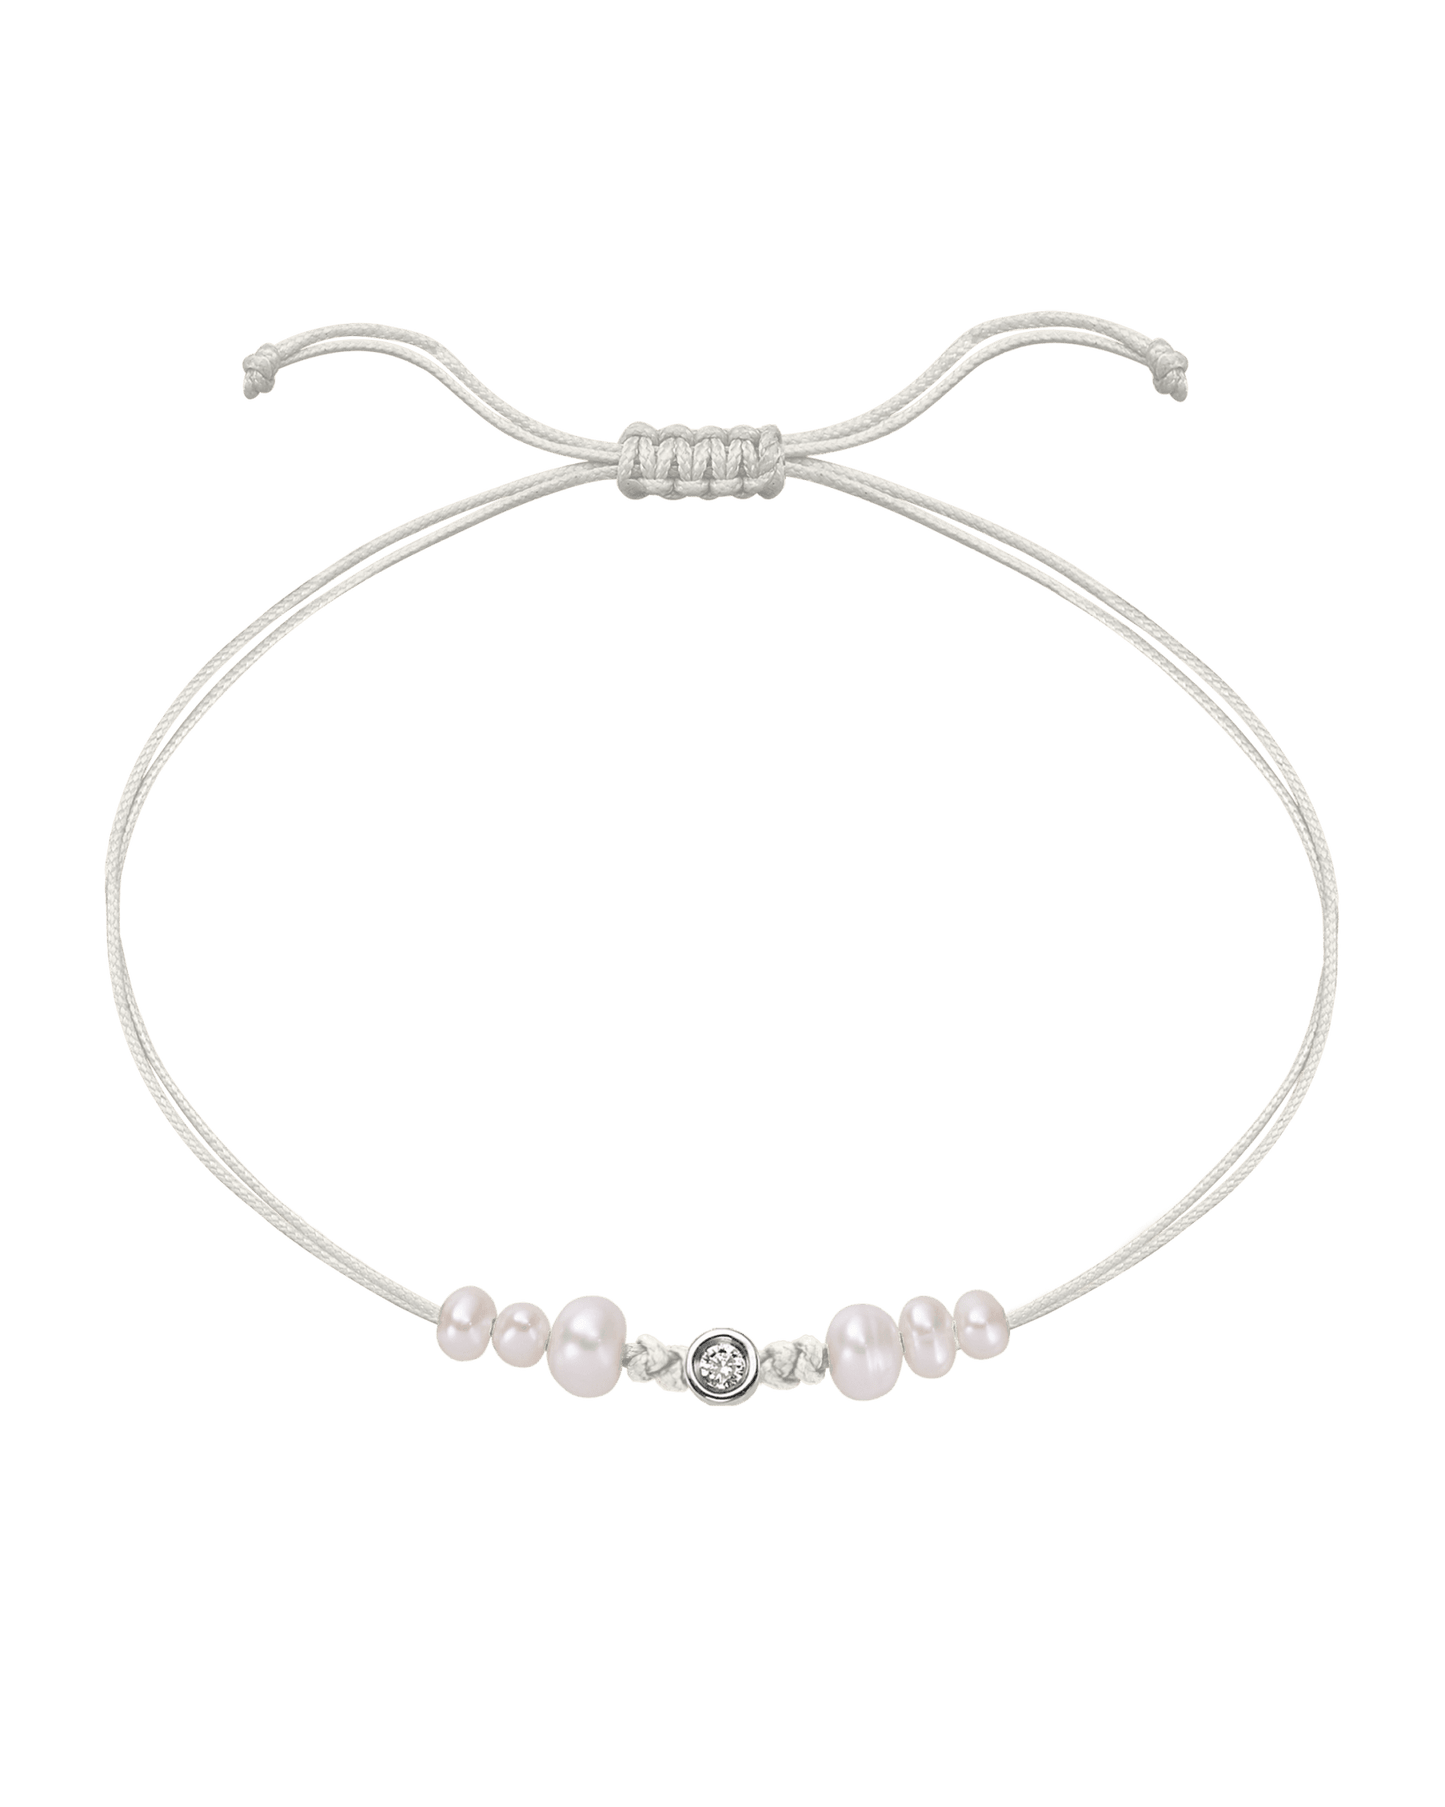 Six Natural Pearl String of Love Bracelet - 14K White Gold Bracelet 14K Solid Gold Pearl Small: 0.03ct 